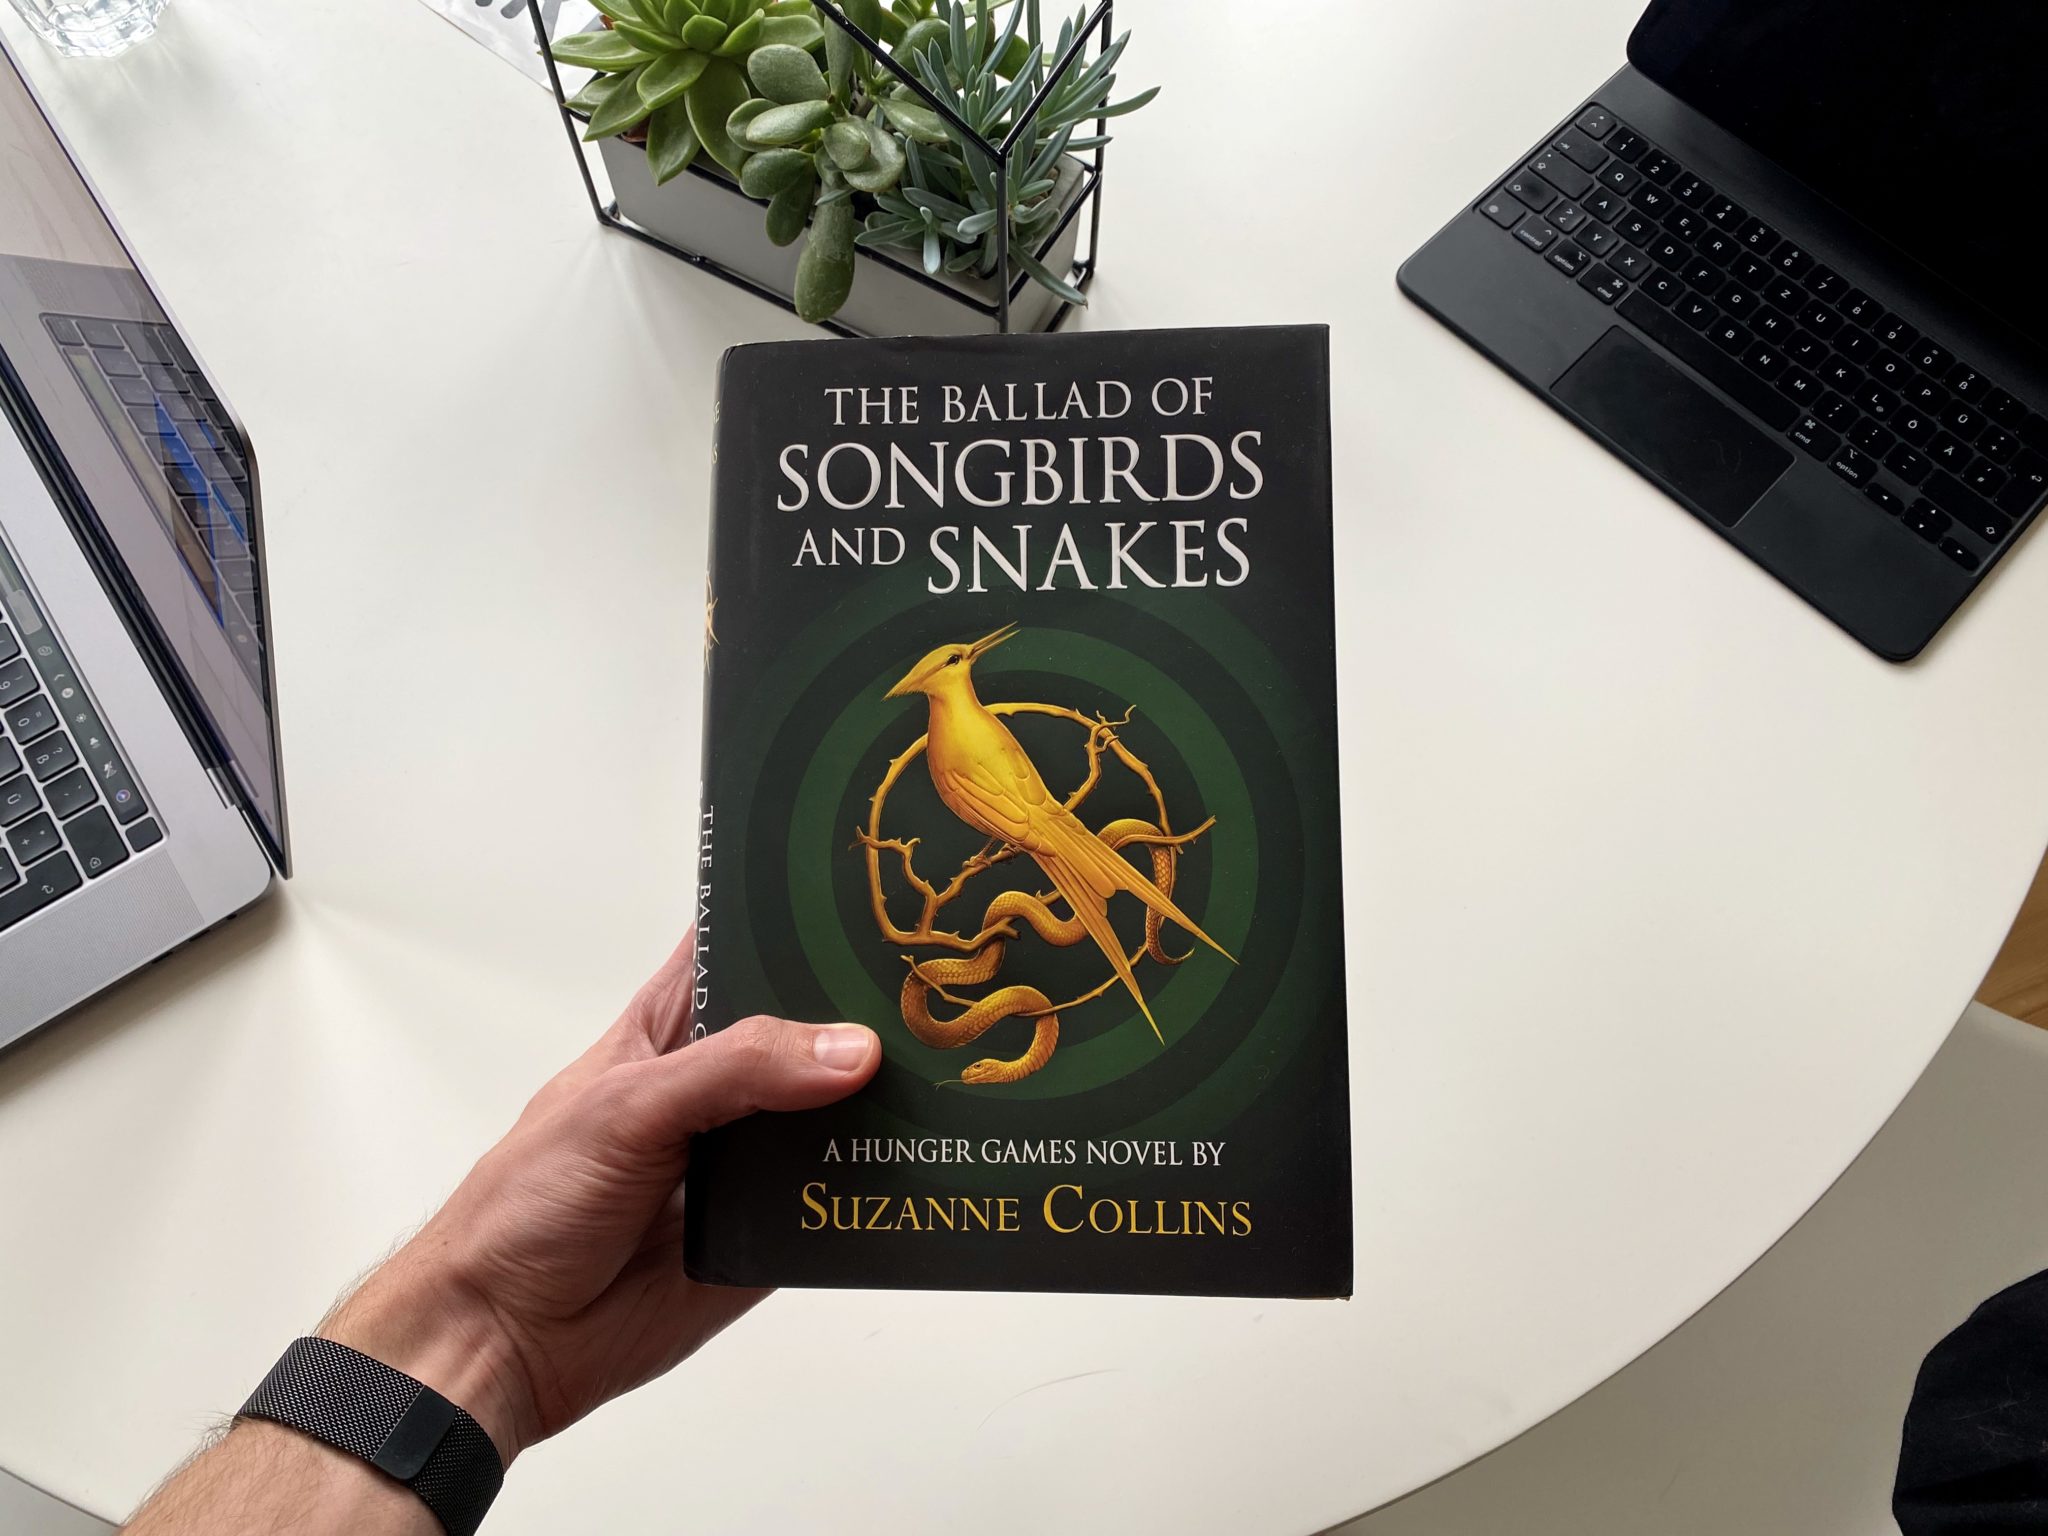 suzanne collins the ballad of songbirds and snakes